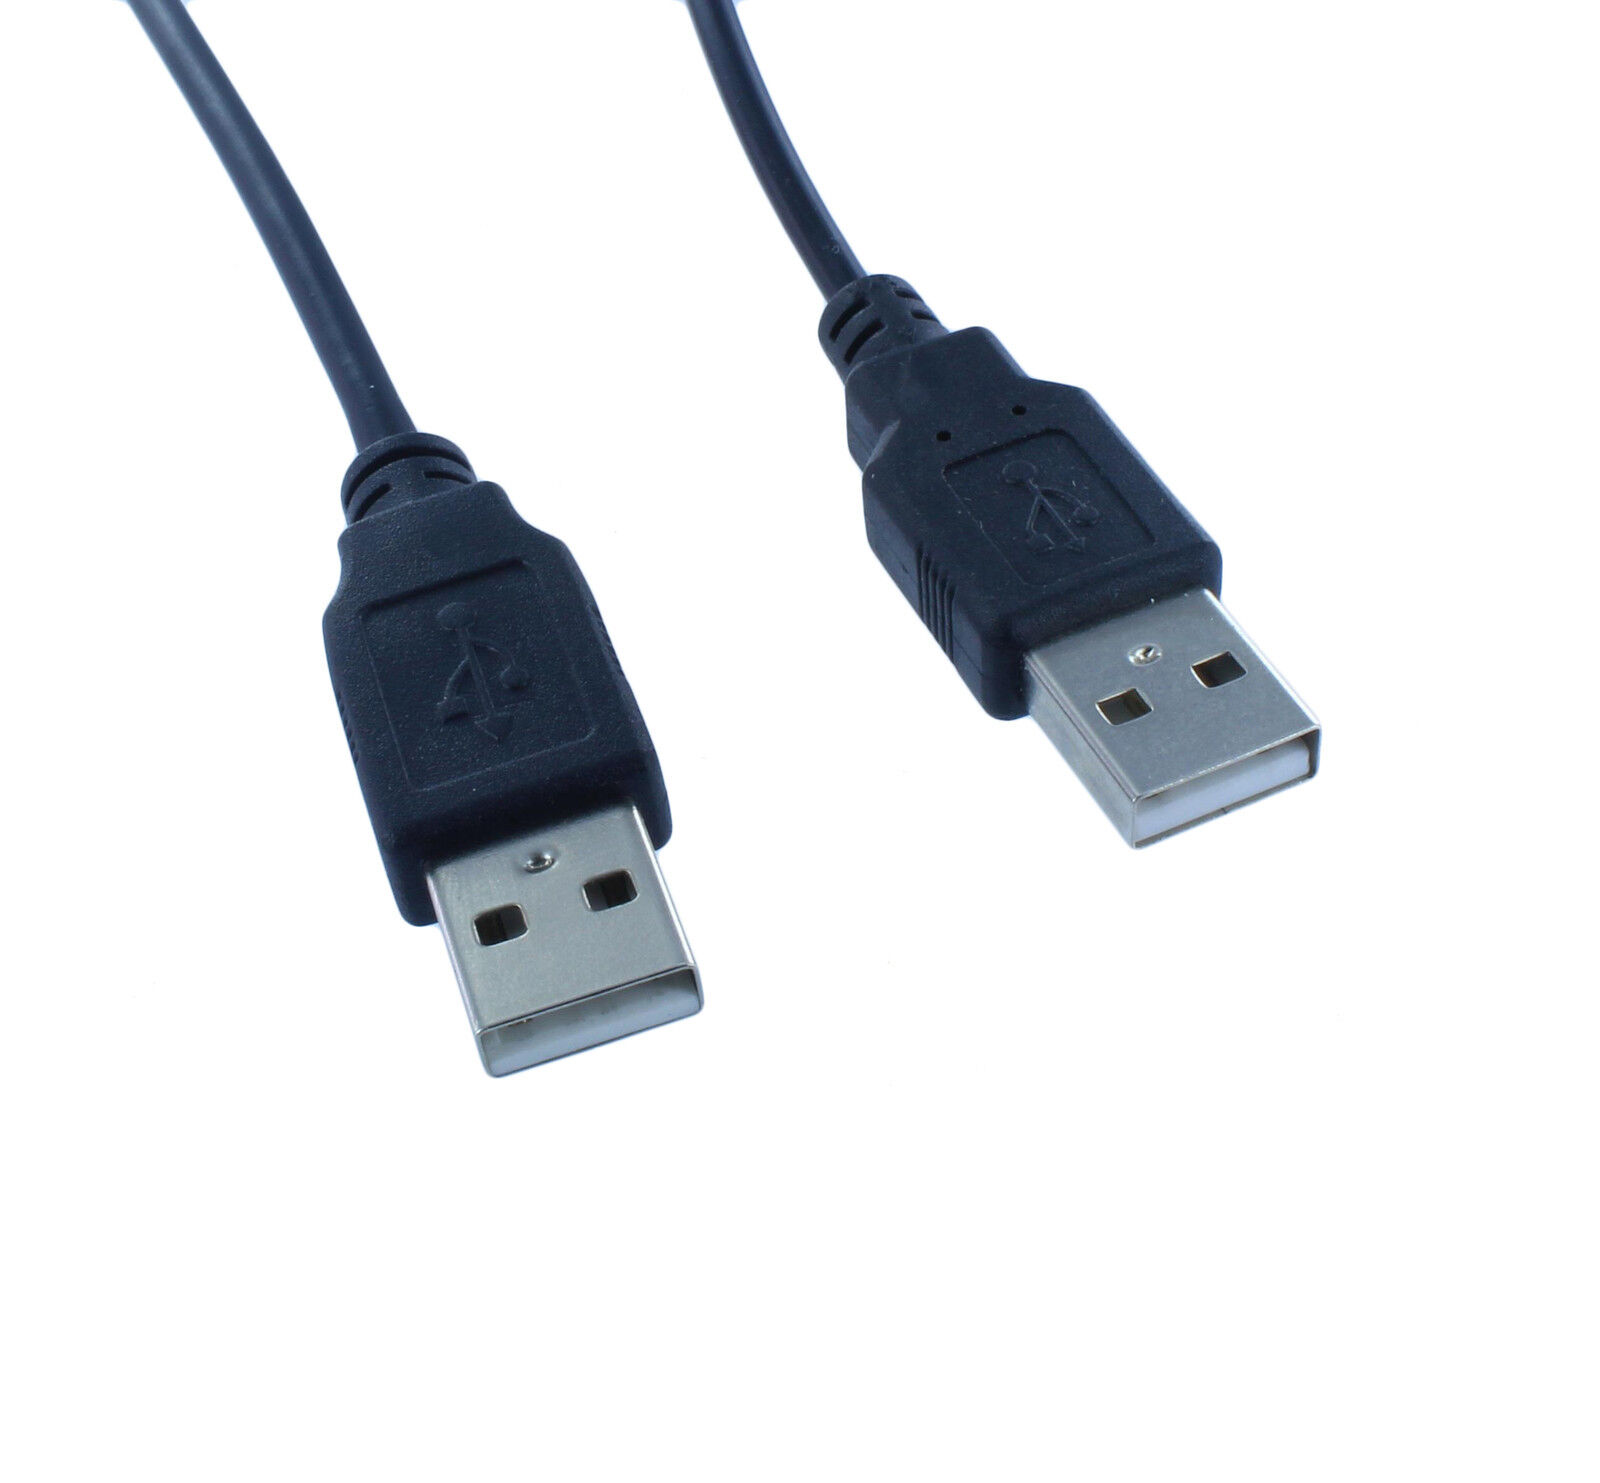 2 Pack 10Ft USB2.0 Type A Male to Type A Male Cable Cord Black(U2A1-A1-10-2PK)